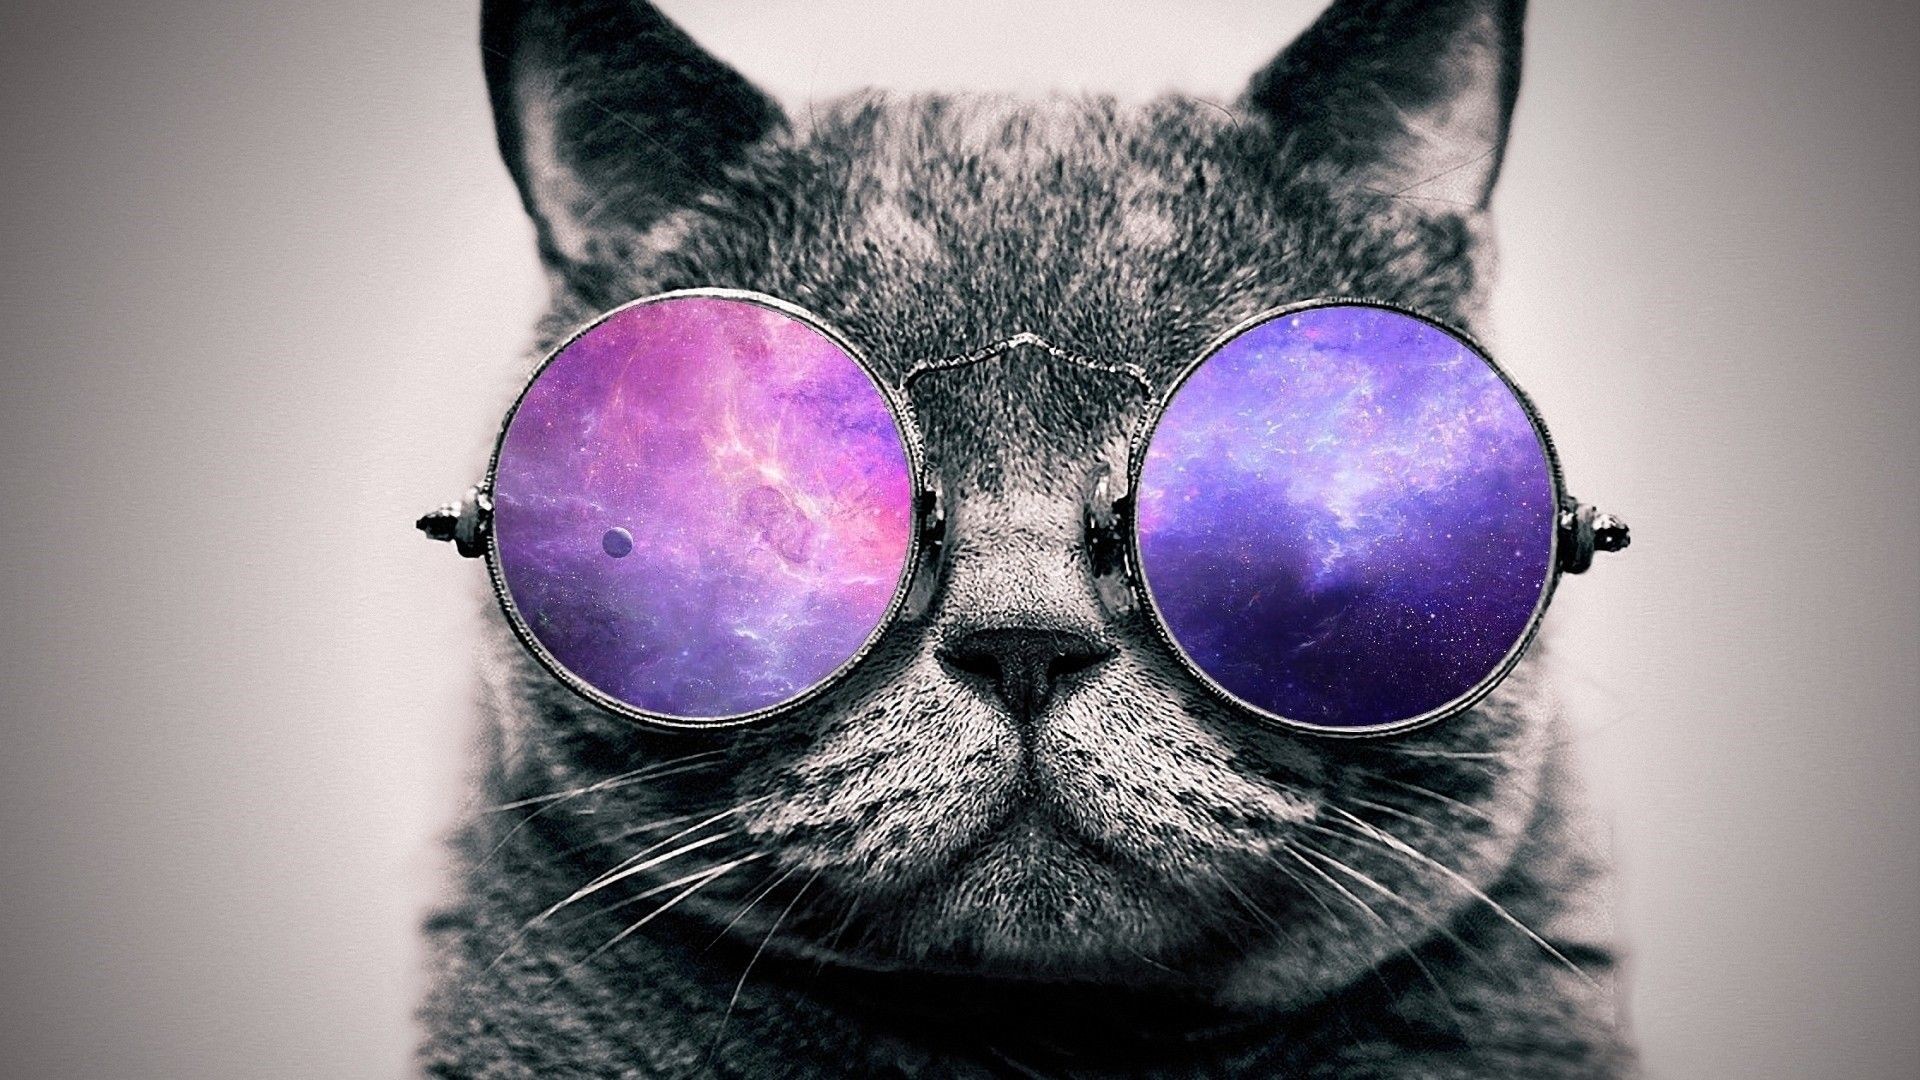 1920x1080, Cat With Sunglasses Wallpaper - Cat With Glasses Wallpaper Hd - HD Wallpaper 